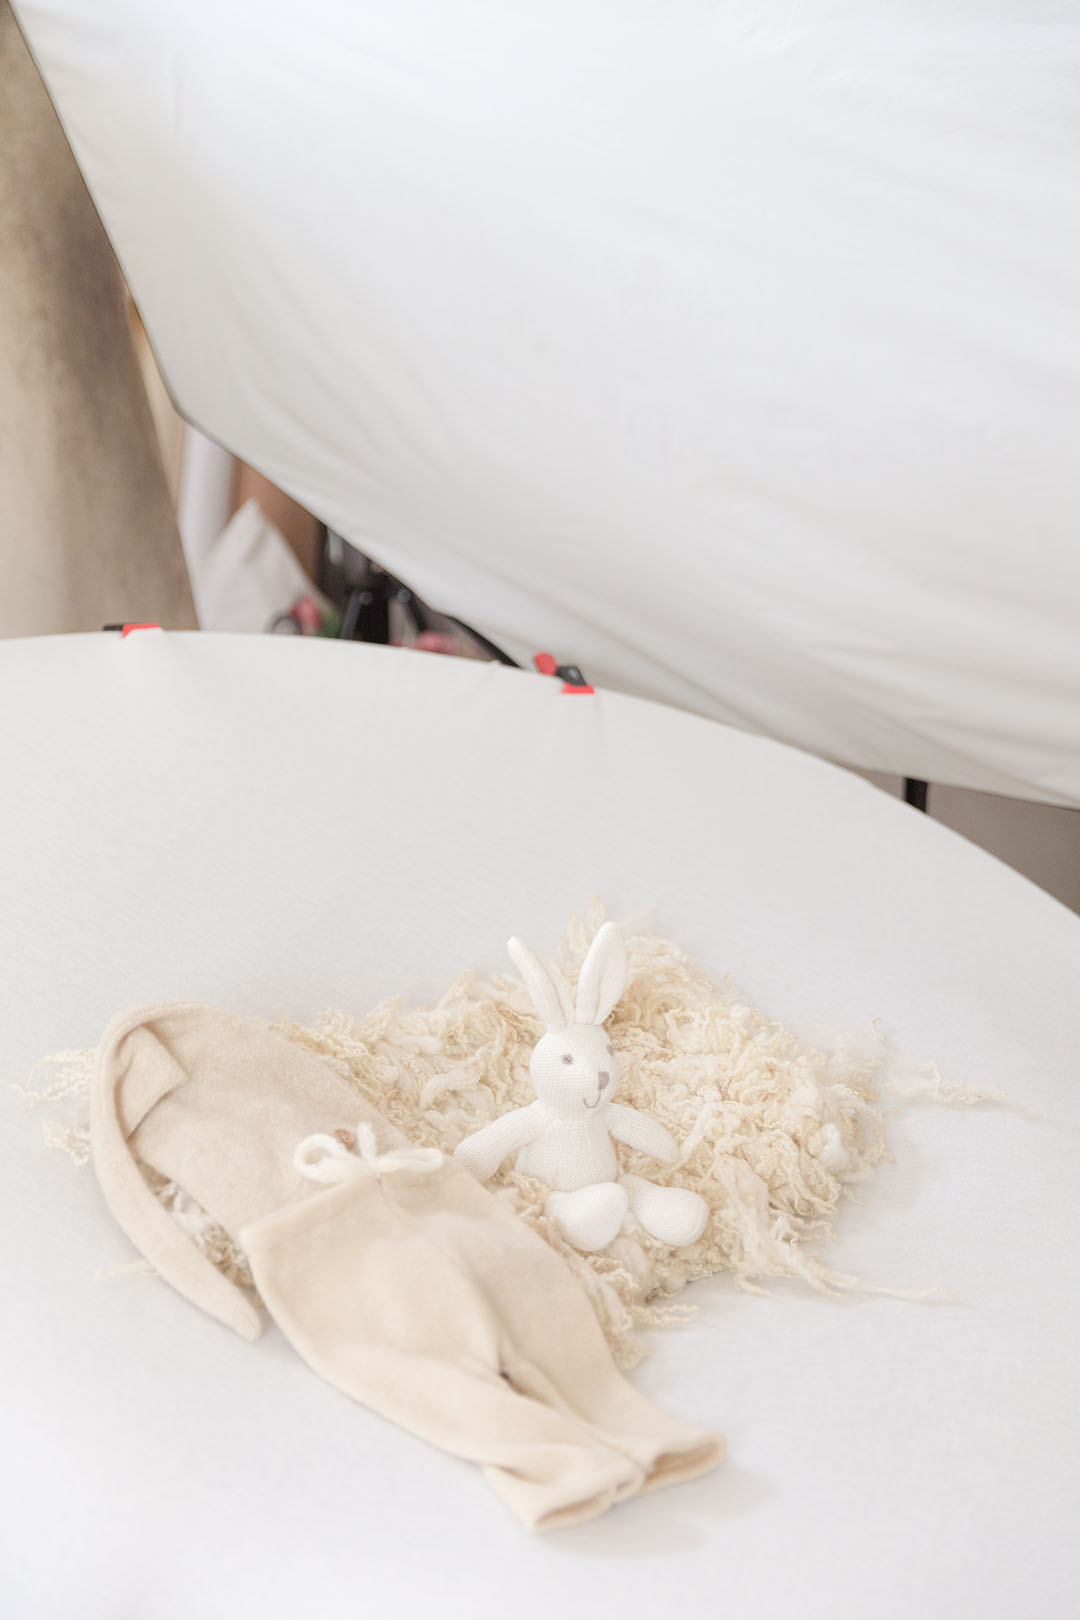 Newborn posing bag prepped with neutral wool layer, bunny and romper. In the background there is a studio light in my studio at hayley morris phtography near malvern